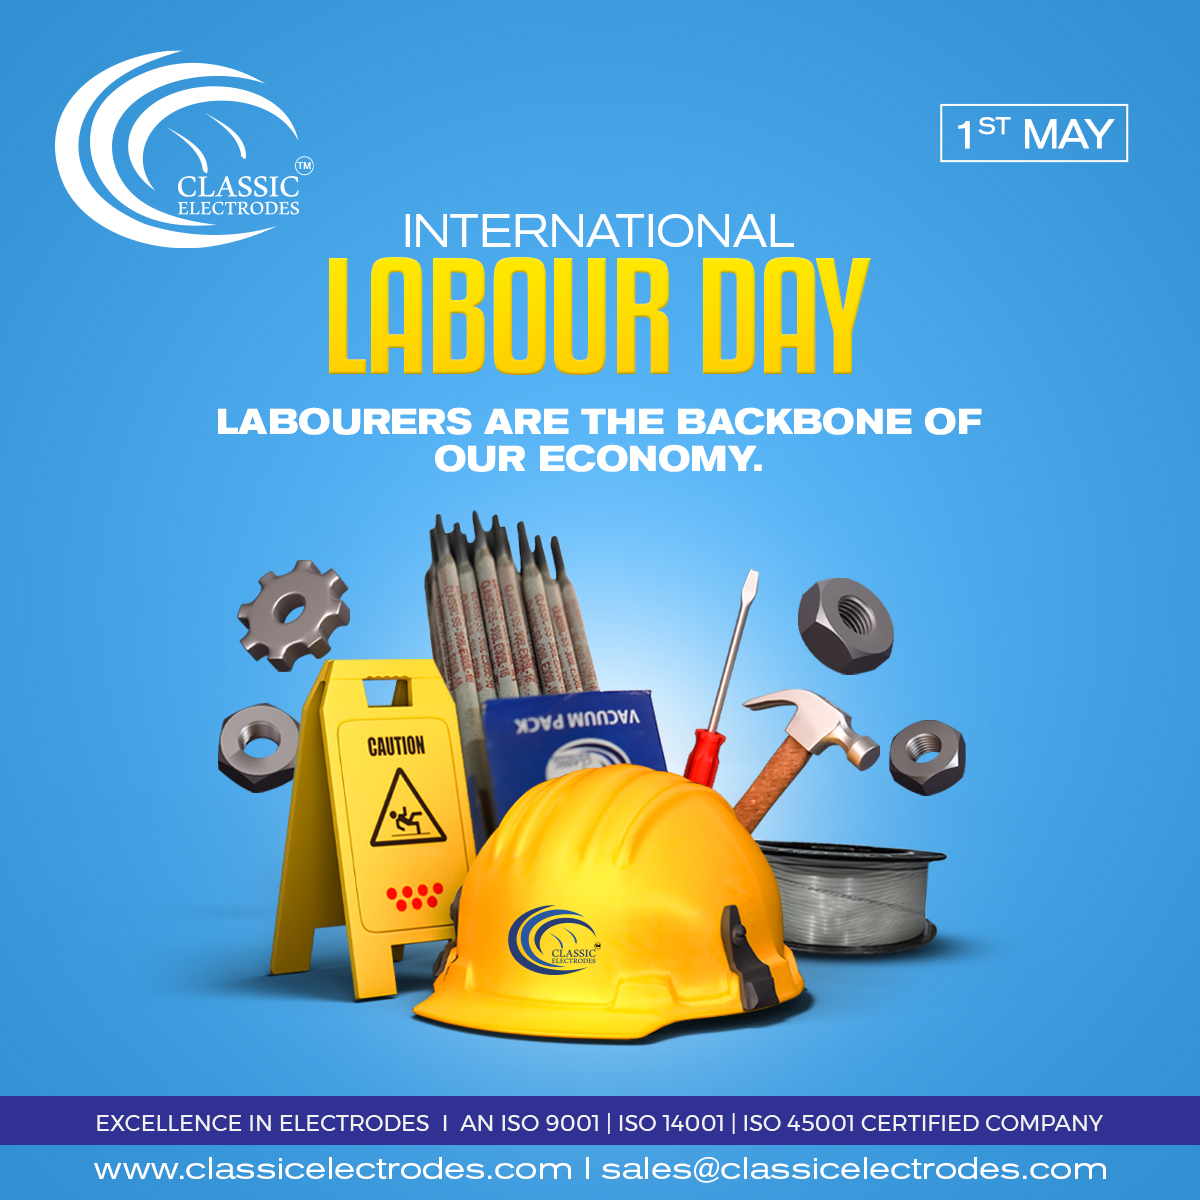 Labourers form the backbone of our economy, their dedication and hard work uphold the nation's growth. Happy International Labour Day.

#InternationalLabourDay #LabourDay2024 #Labour #classicelectrodes #stainlesssteel #steelfabrication